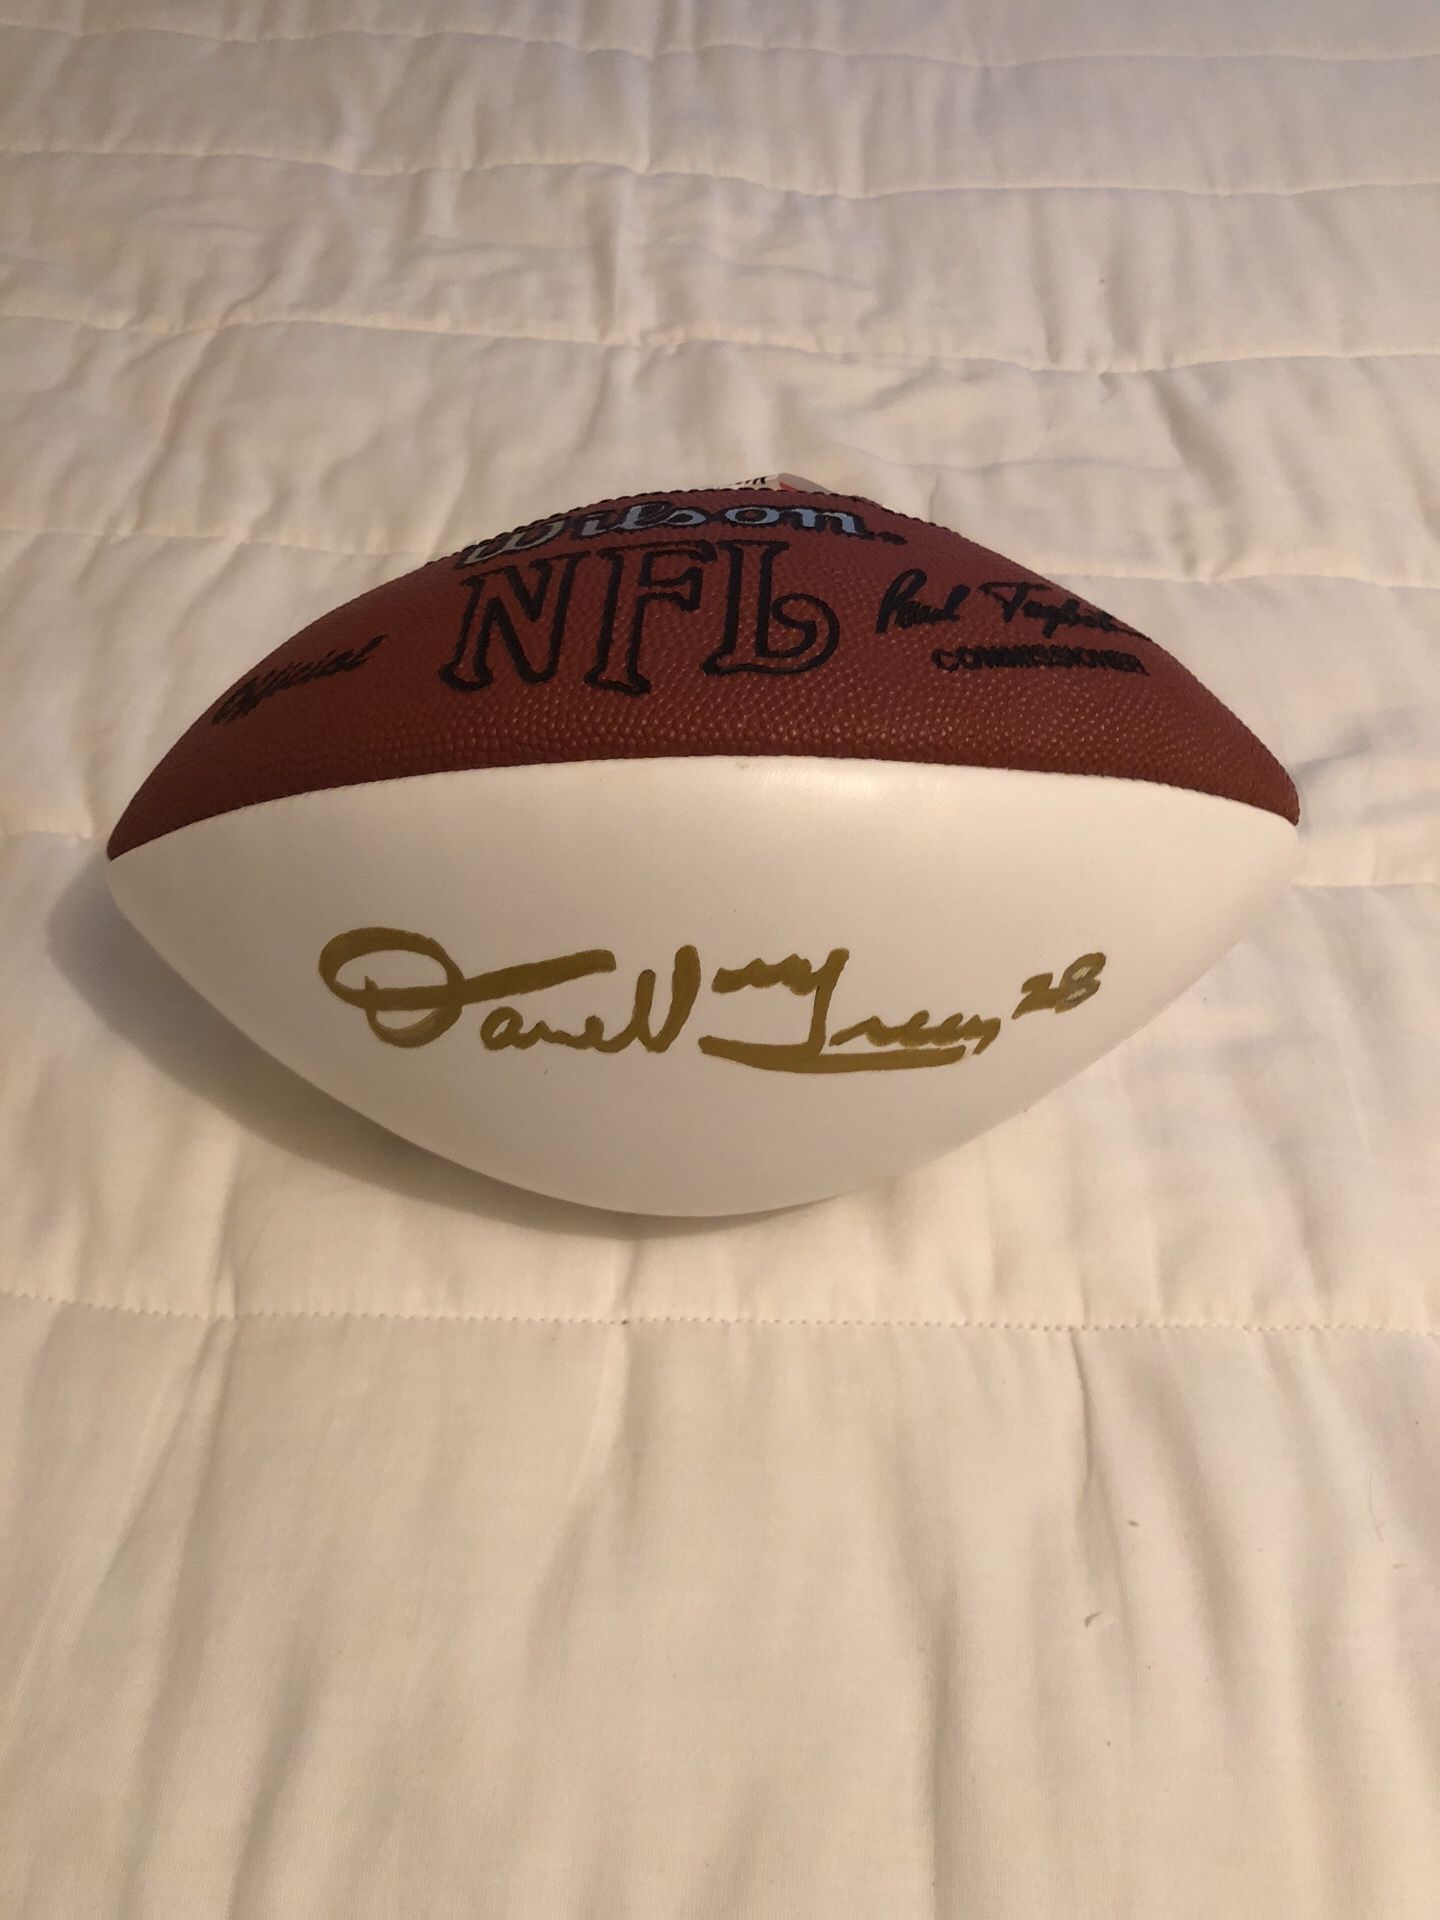 Darrell Green, HOF CB Washington Redskins Autographed (3Panel White) Official Wilson Football, comes w/ Certificate of Authenticity!